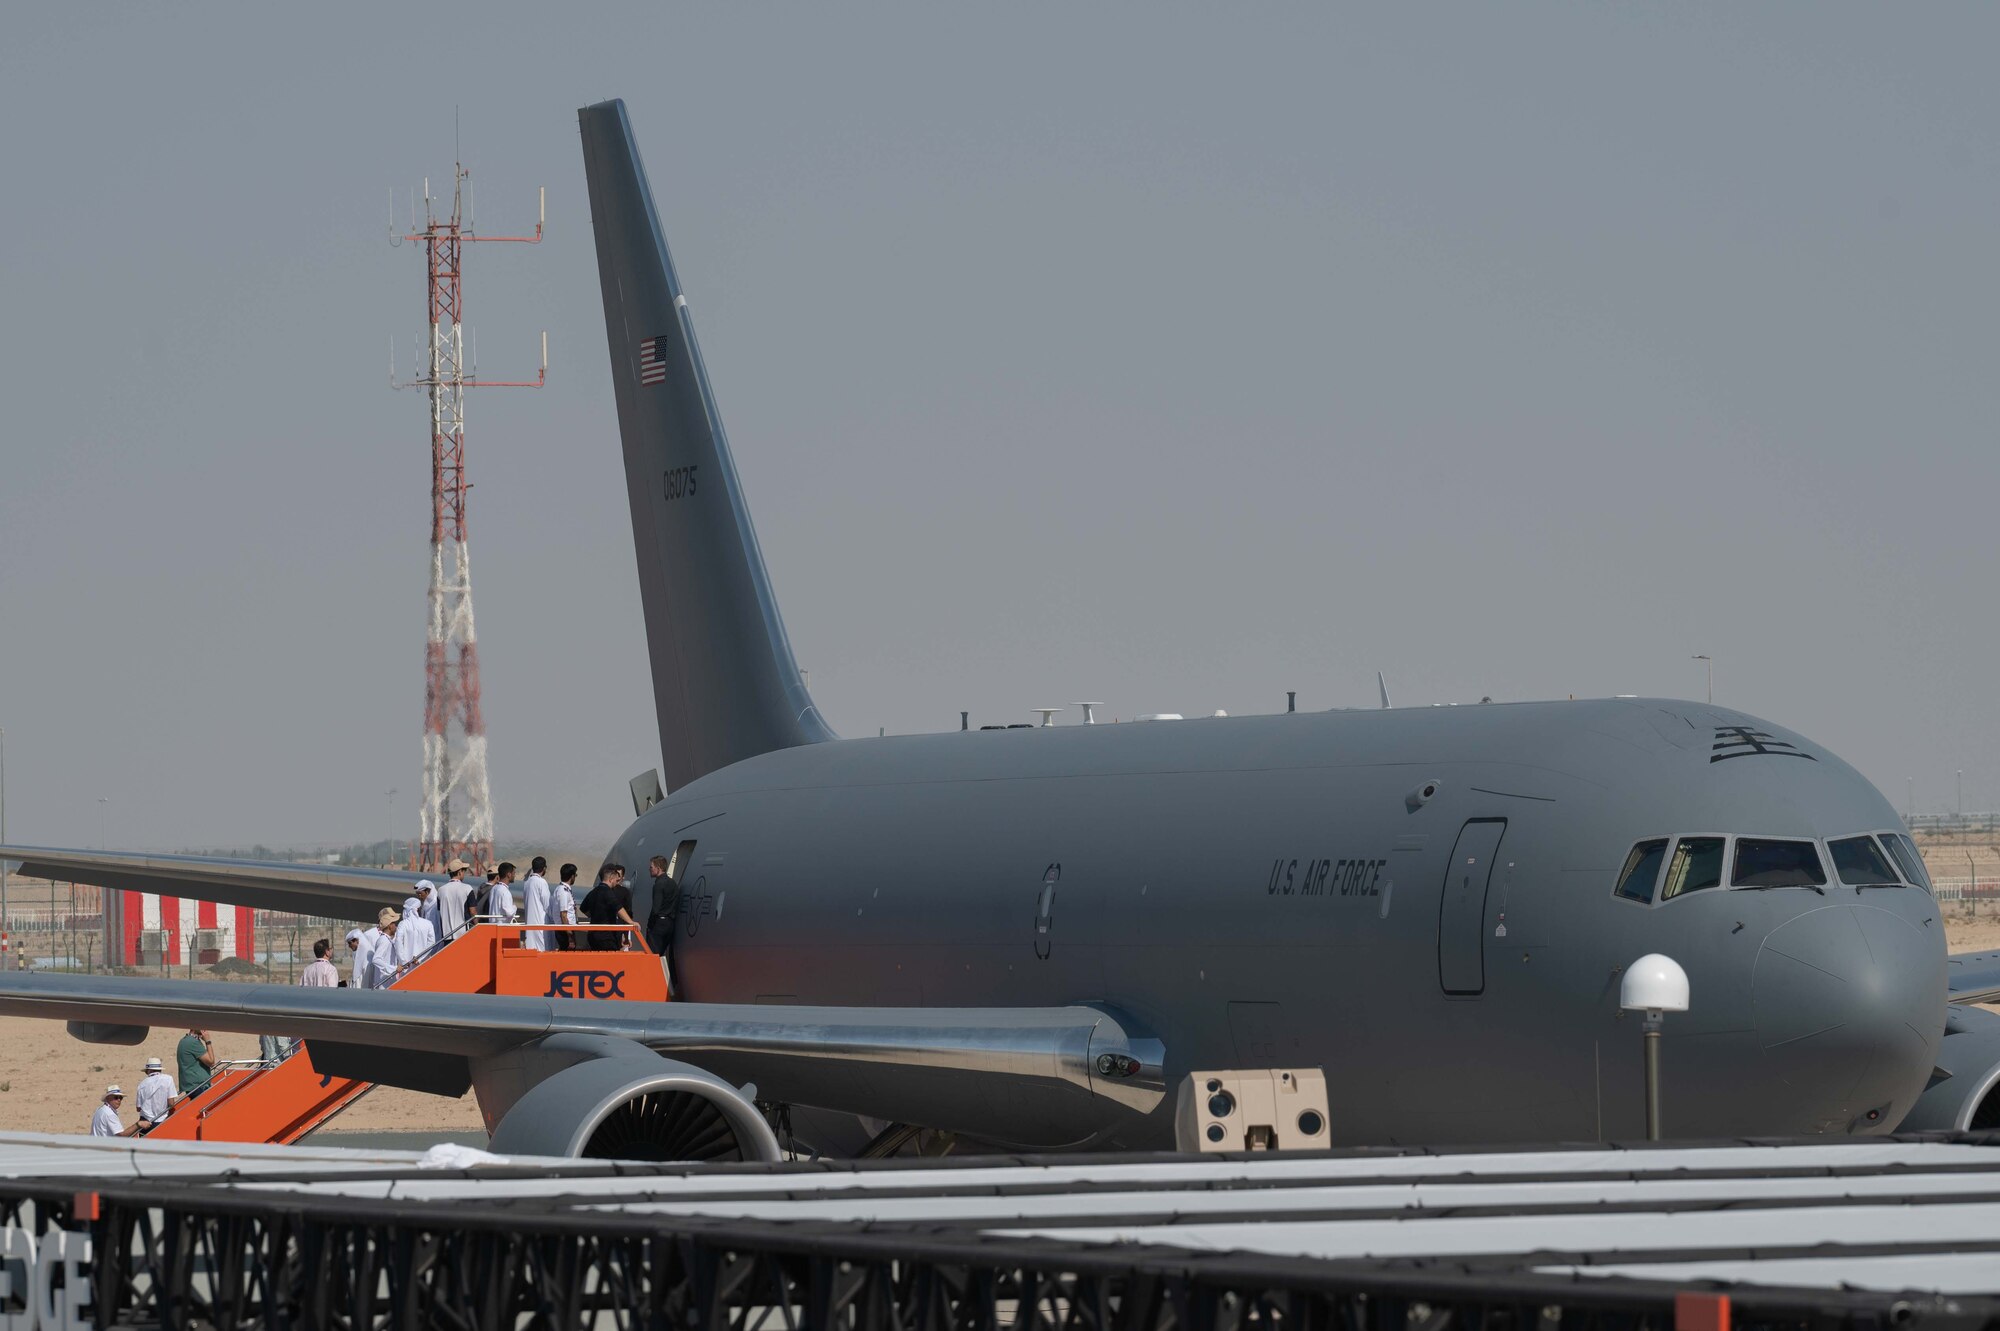 People enter an aircraft on the flightline.